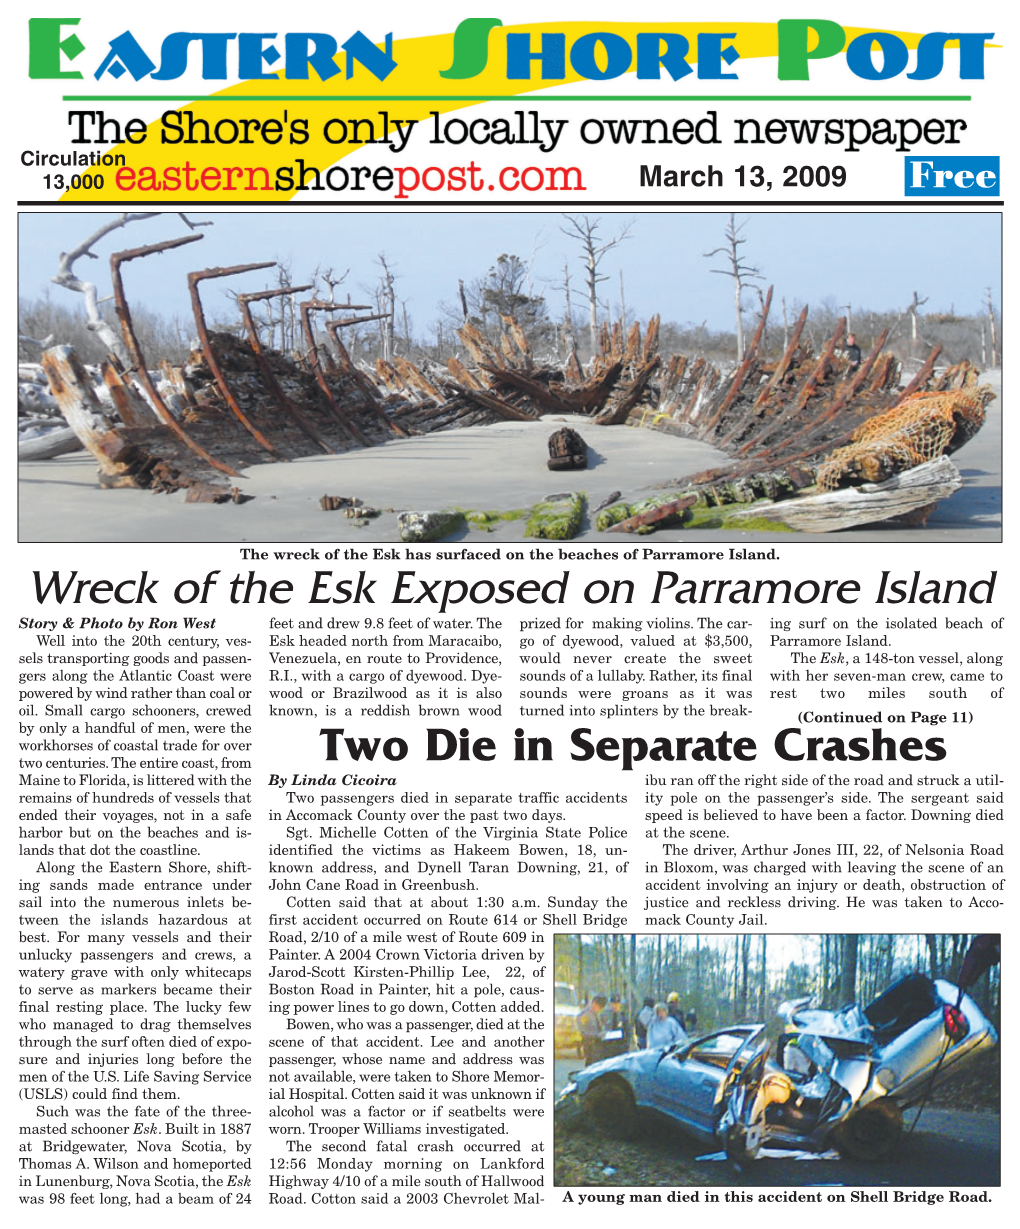 Wreck of the Esk Exposed on Parramore Island Story & Photo by Ron West Feet and Drew 9.8 Feet of Water